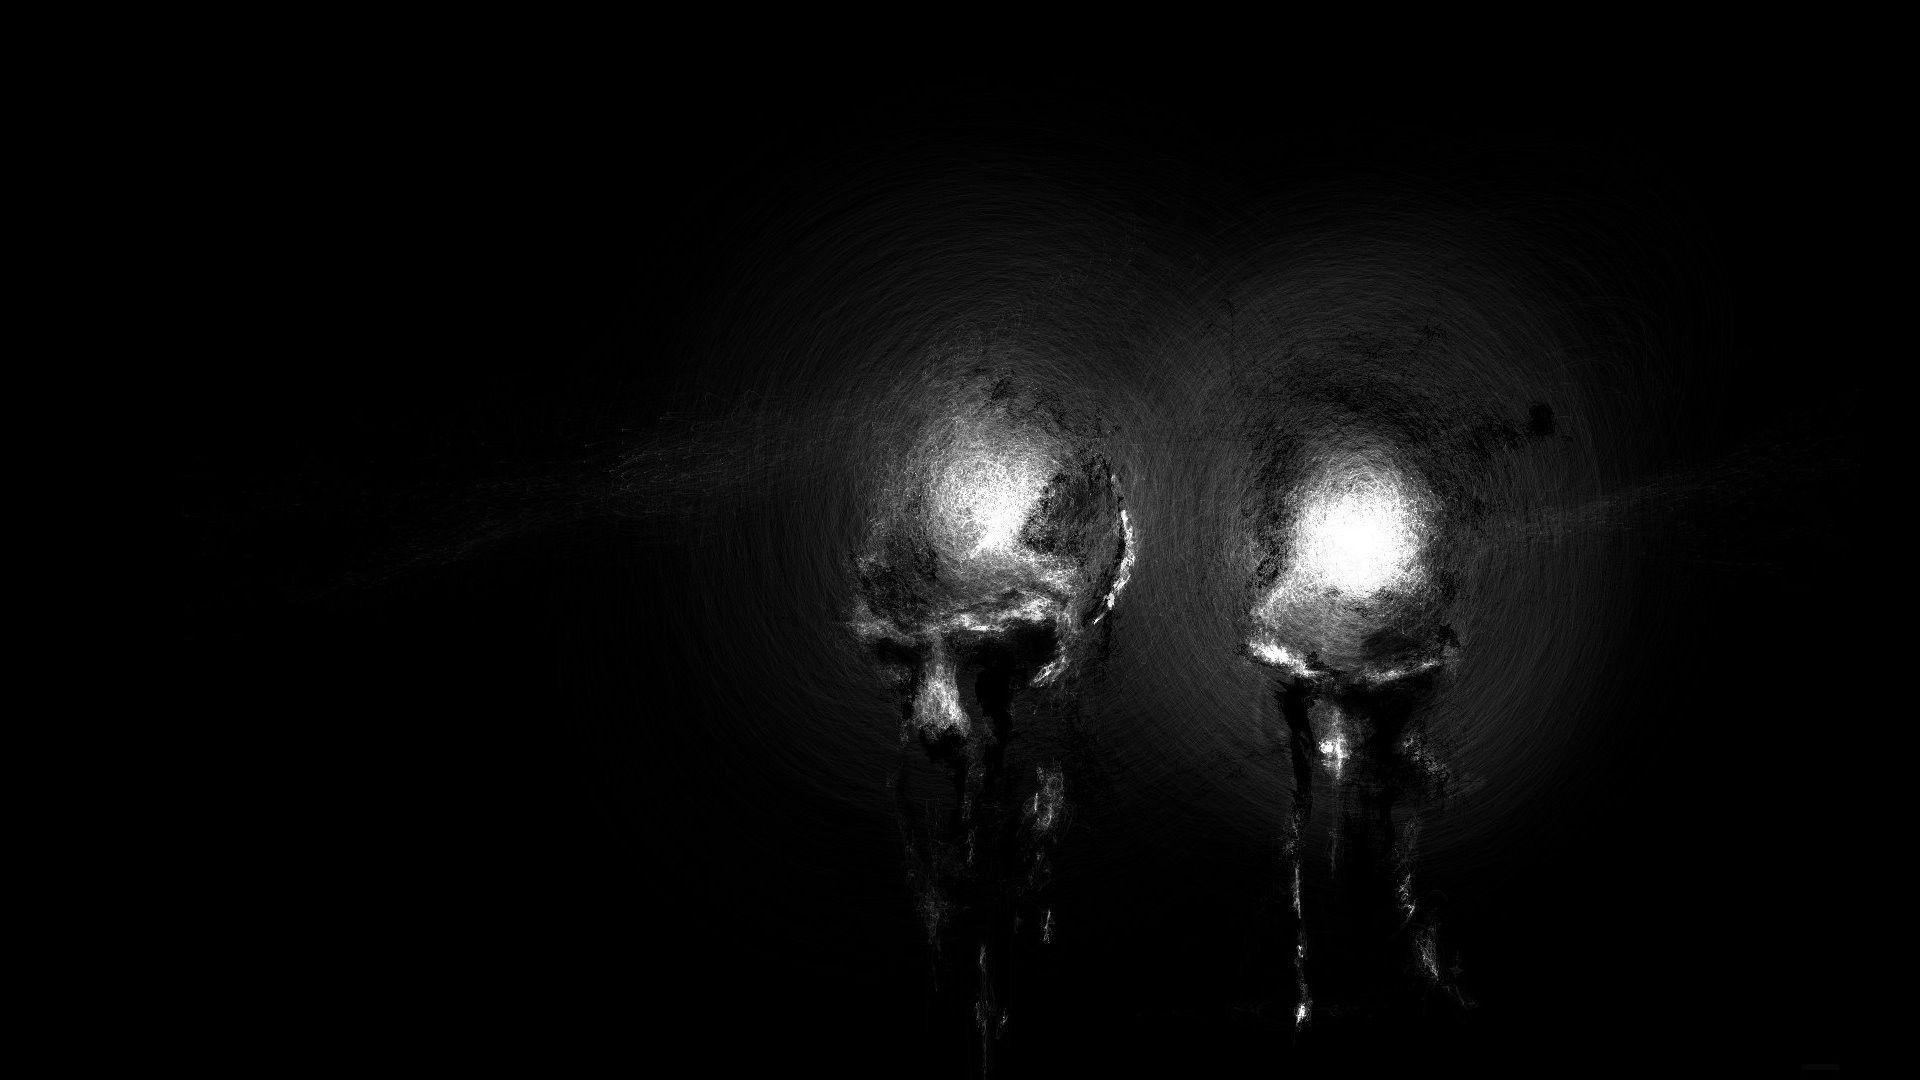 100+] Dark Scary Wallpapers | Wallpapers.com